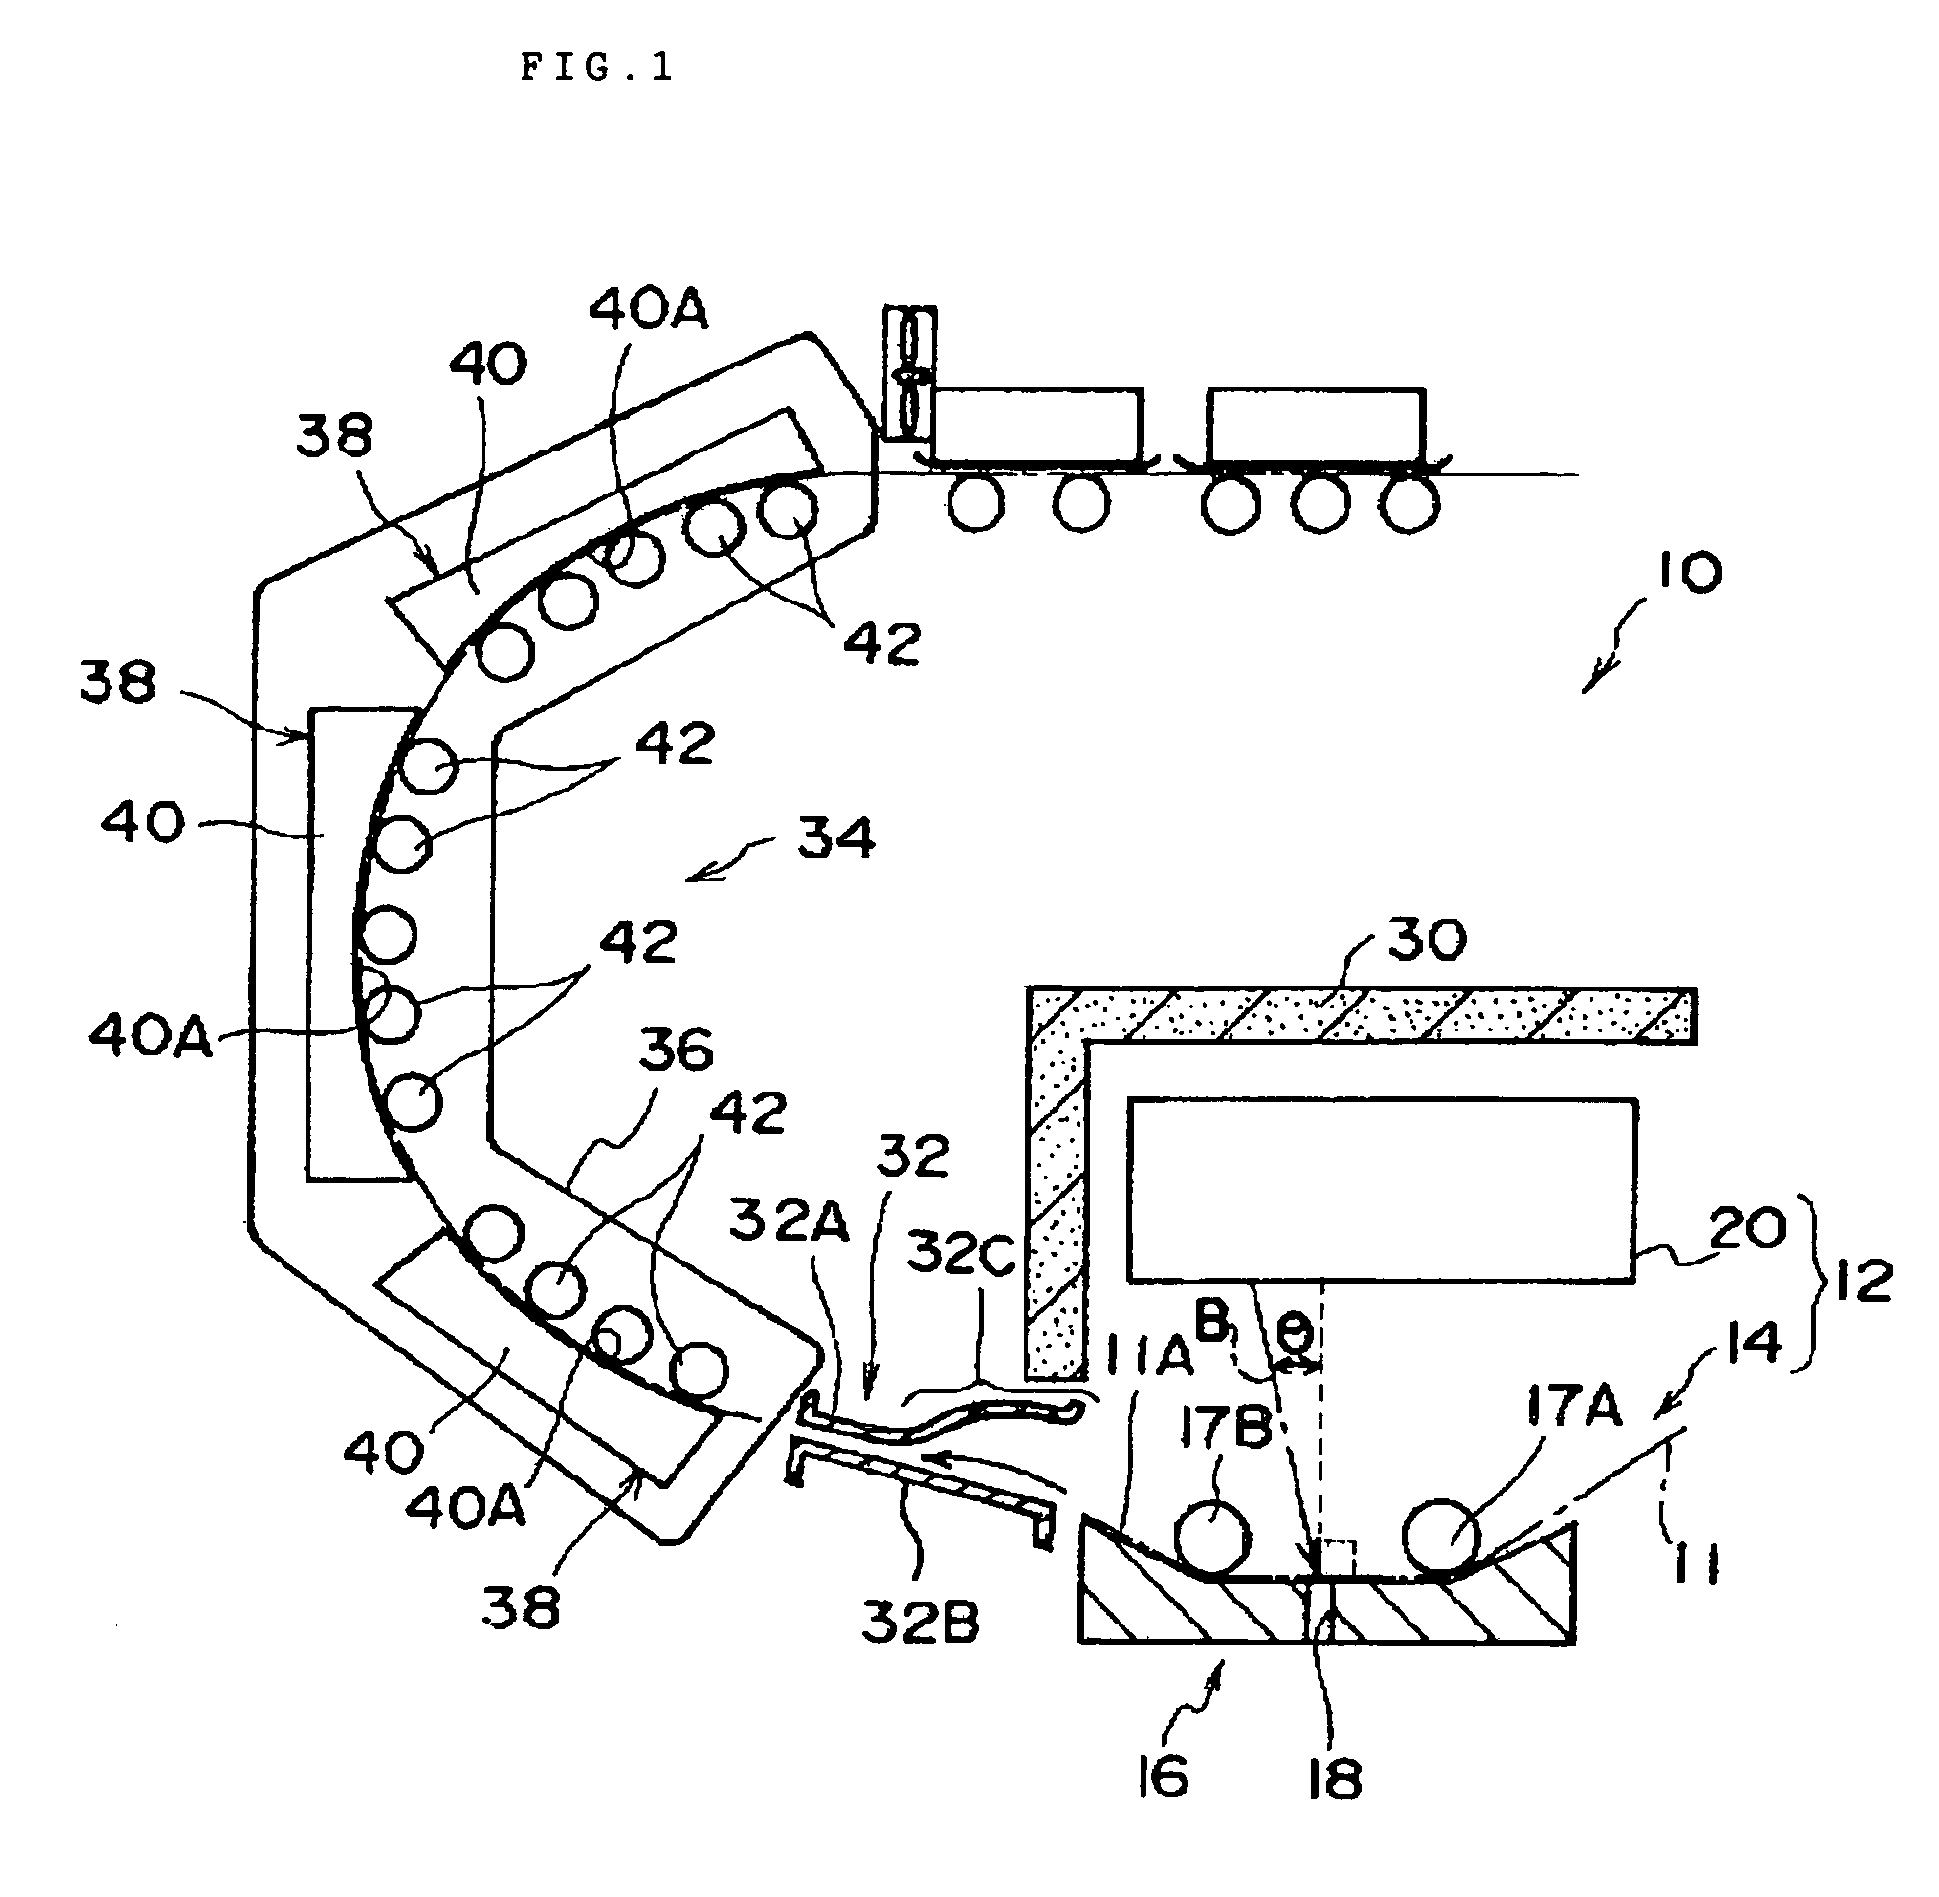 Image forming method for the photothermographic material